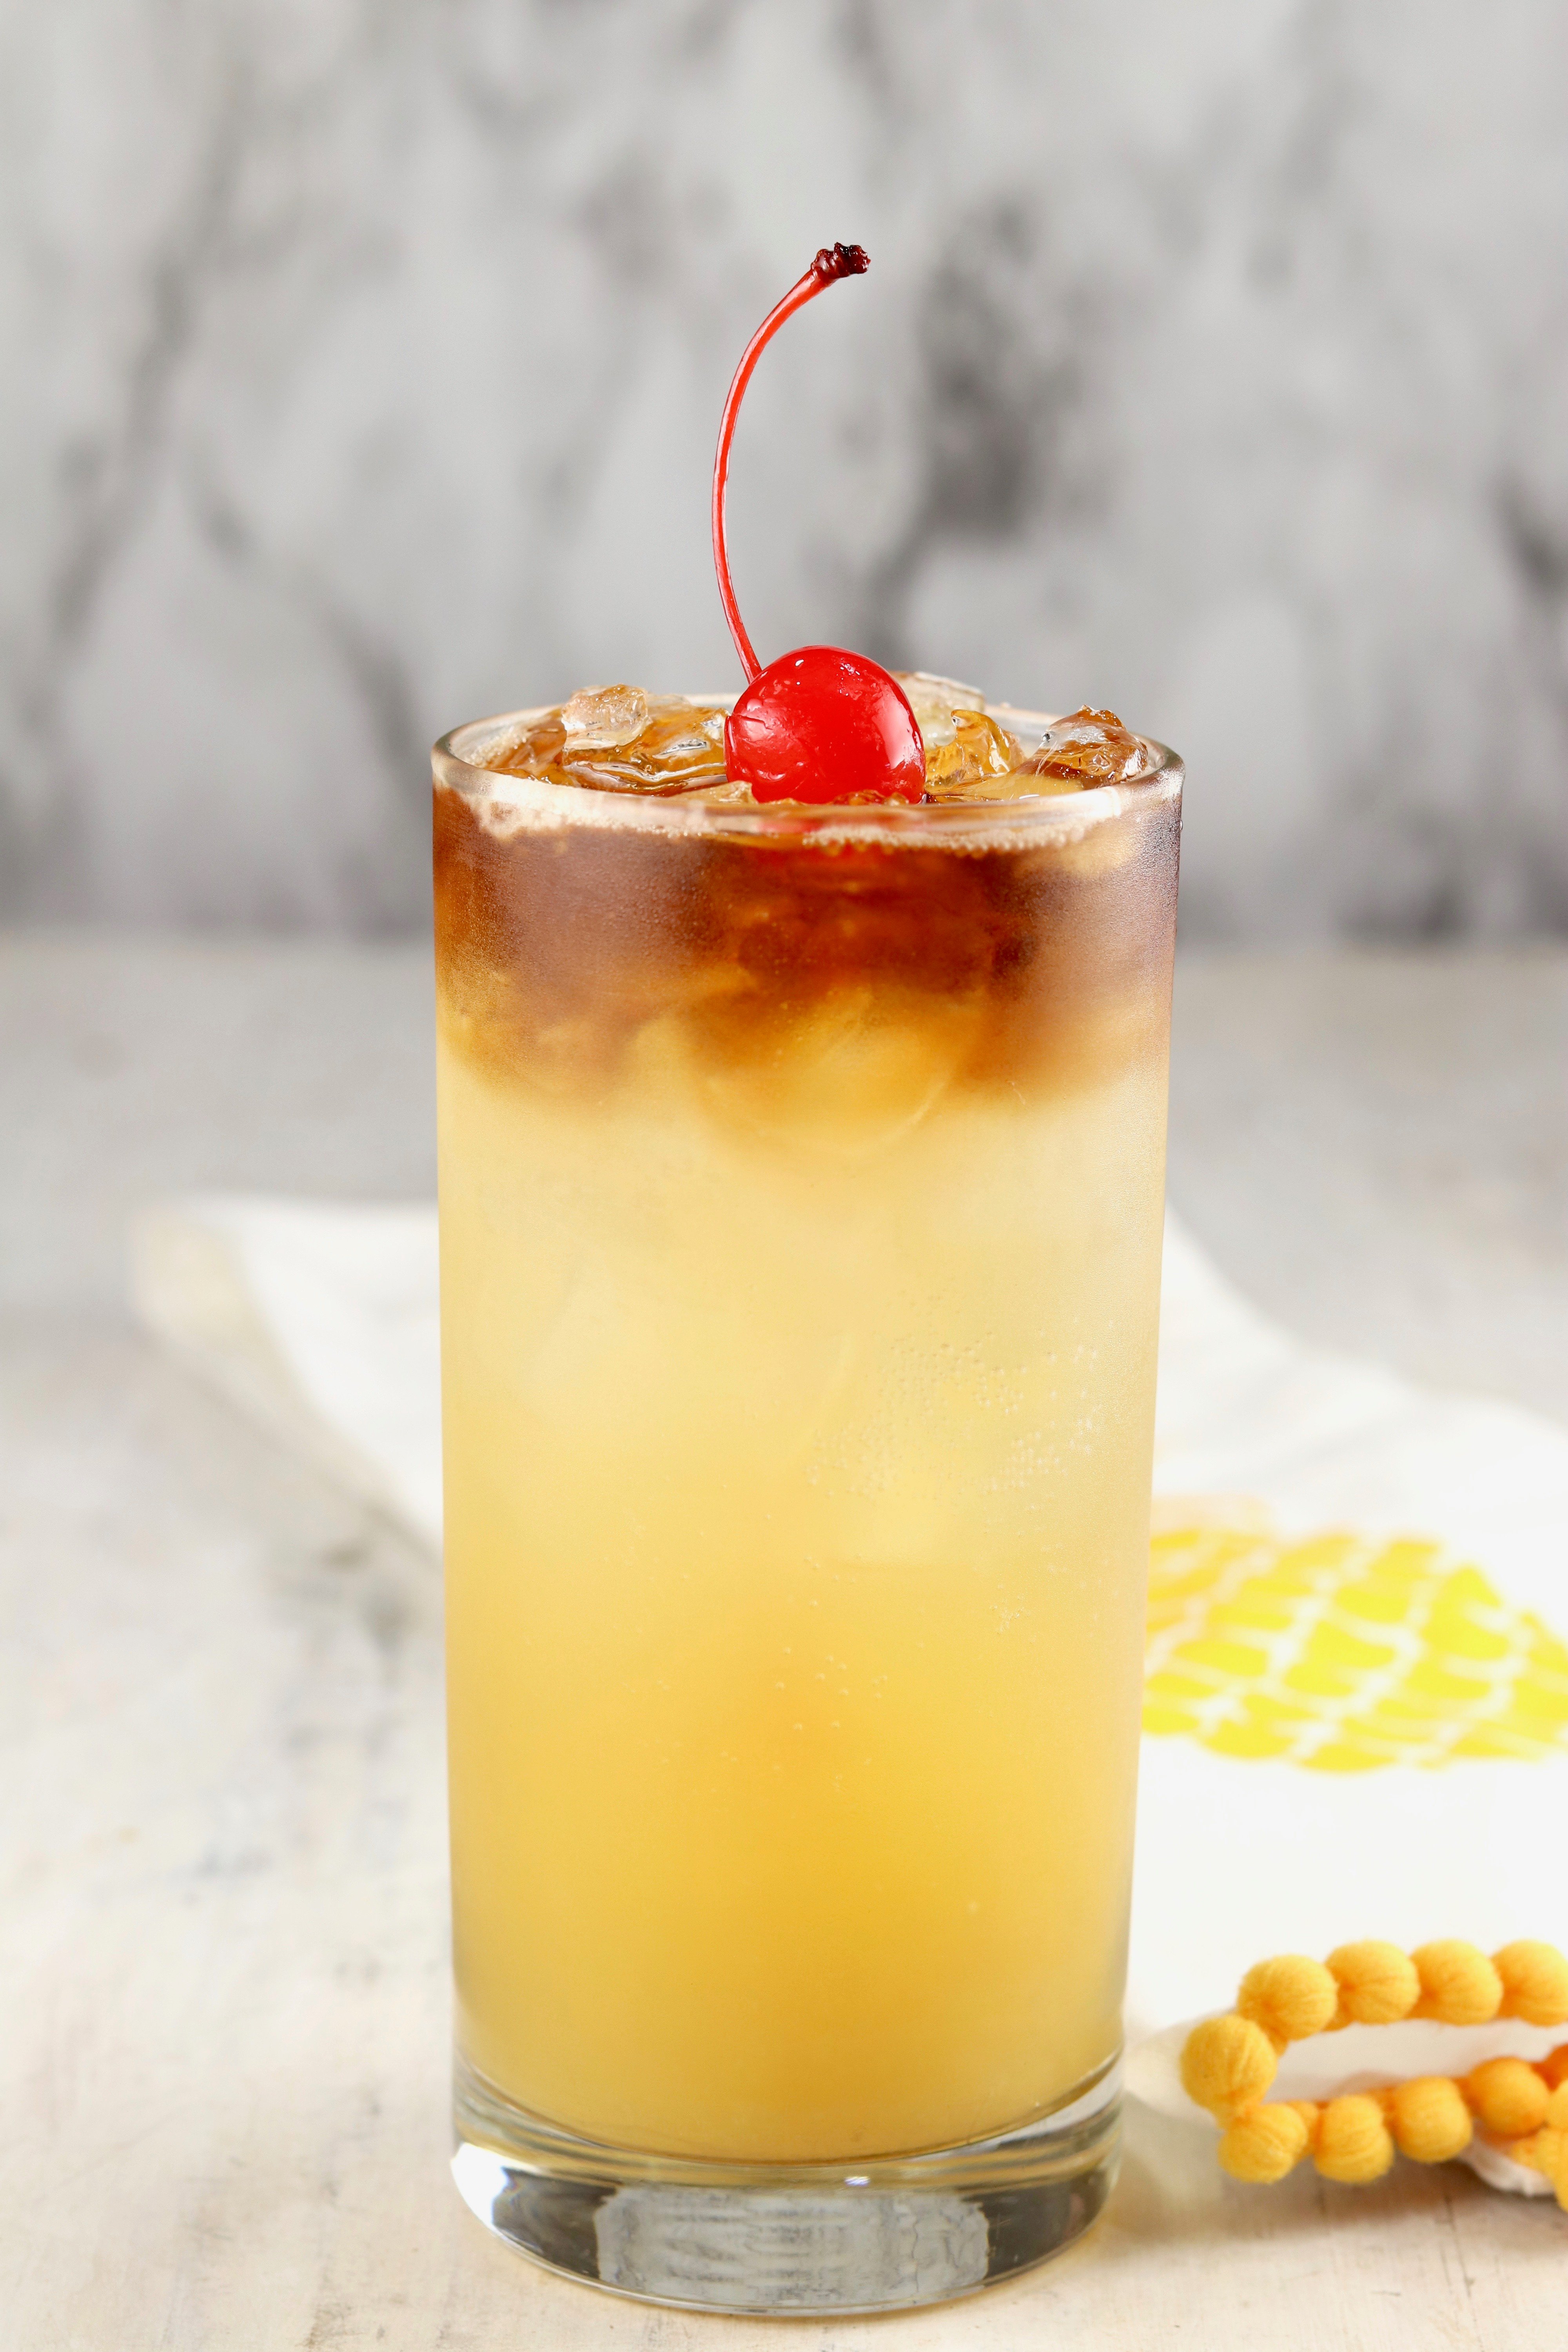 Pineapple Rum Punch Easy Recipe Miss In The Kitchen,How To Clean A Front Load Washer With Vinegar And Baking Soda